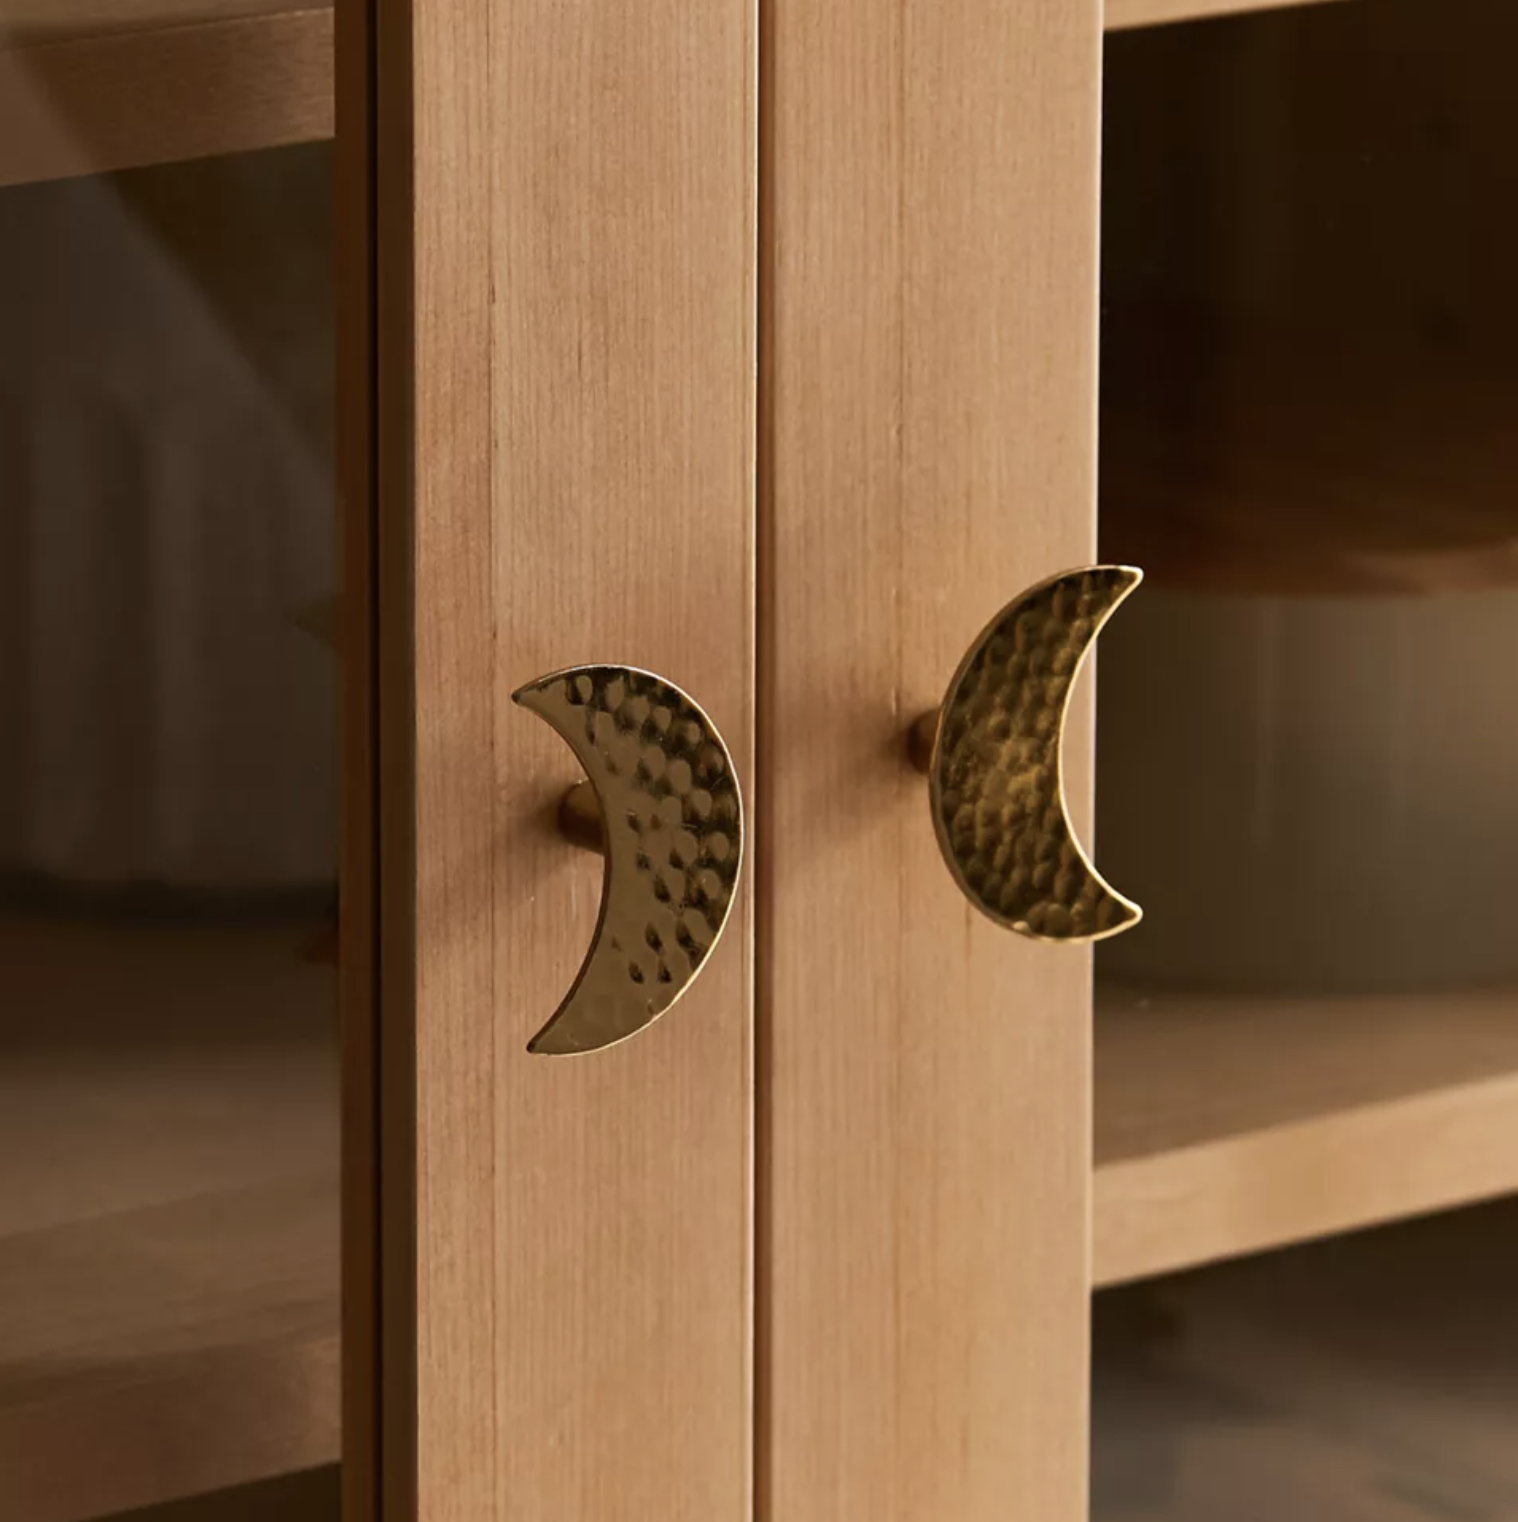 Two moon knobs on a dresser